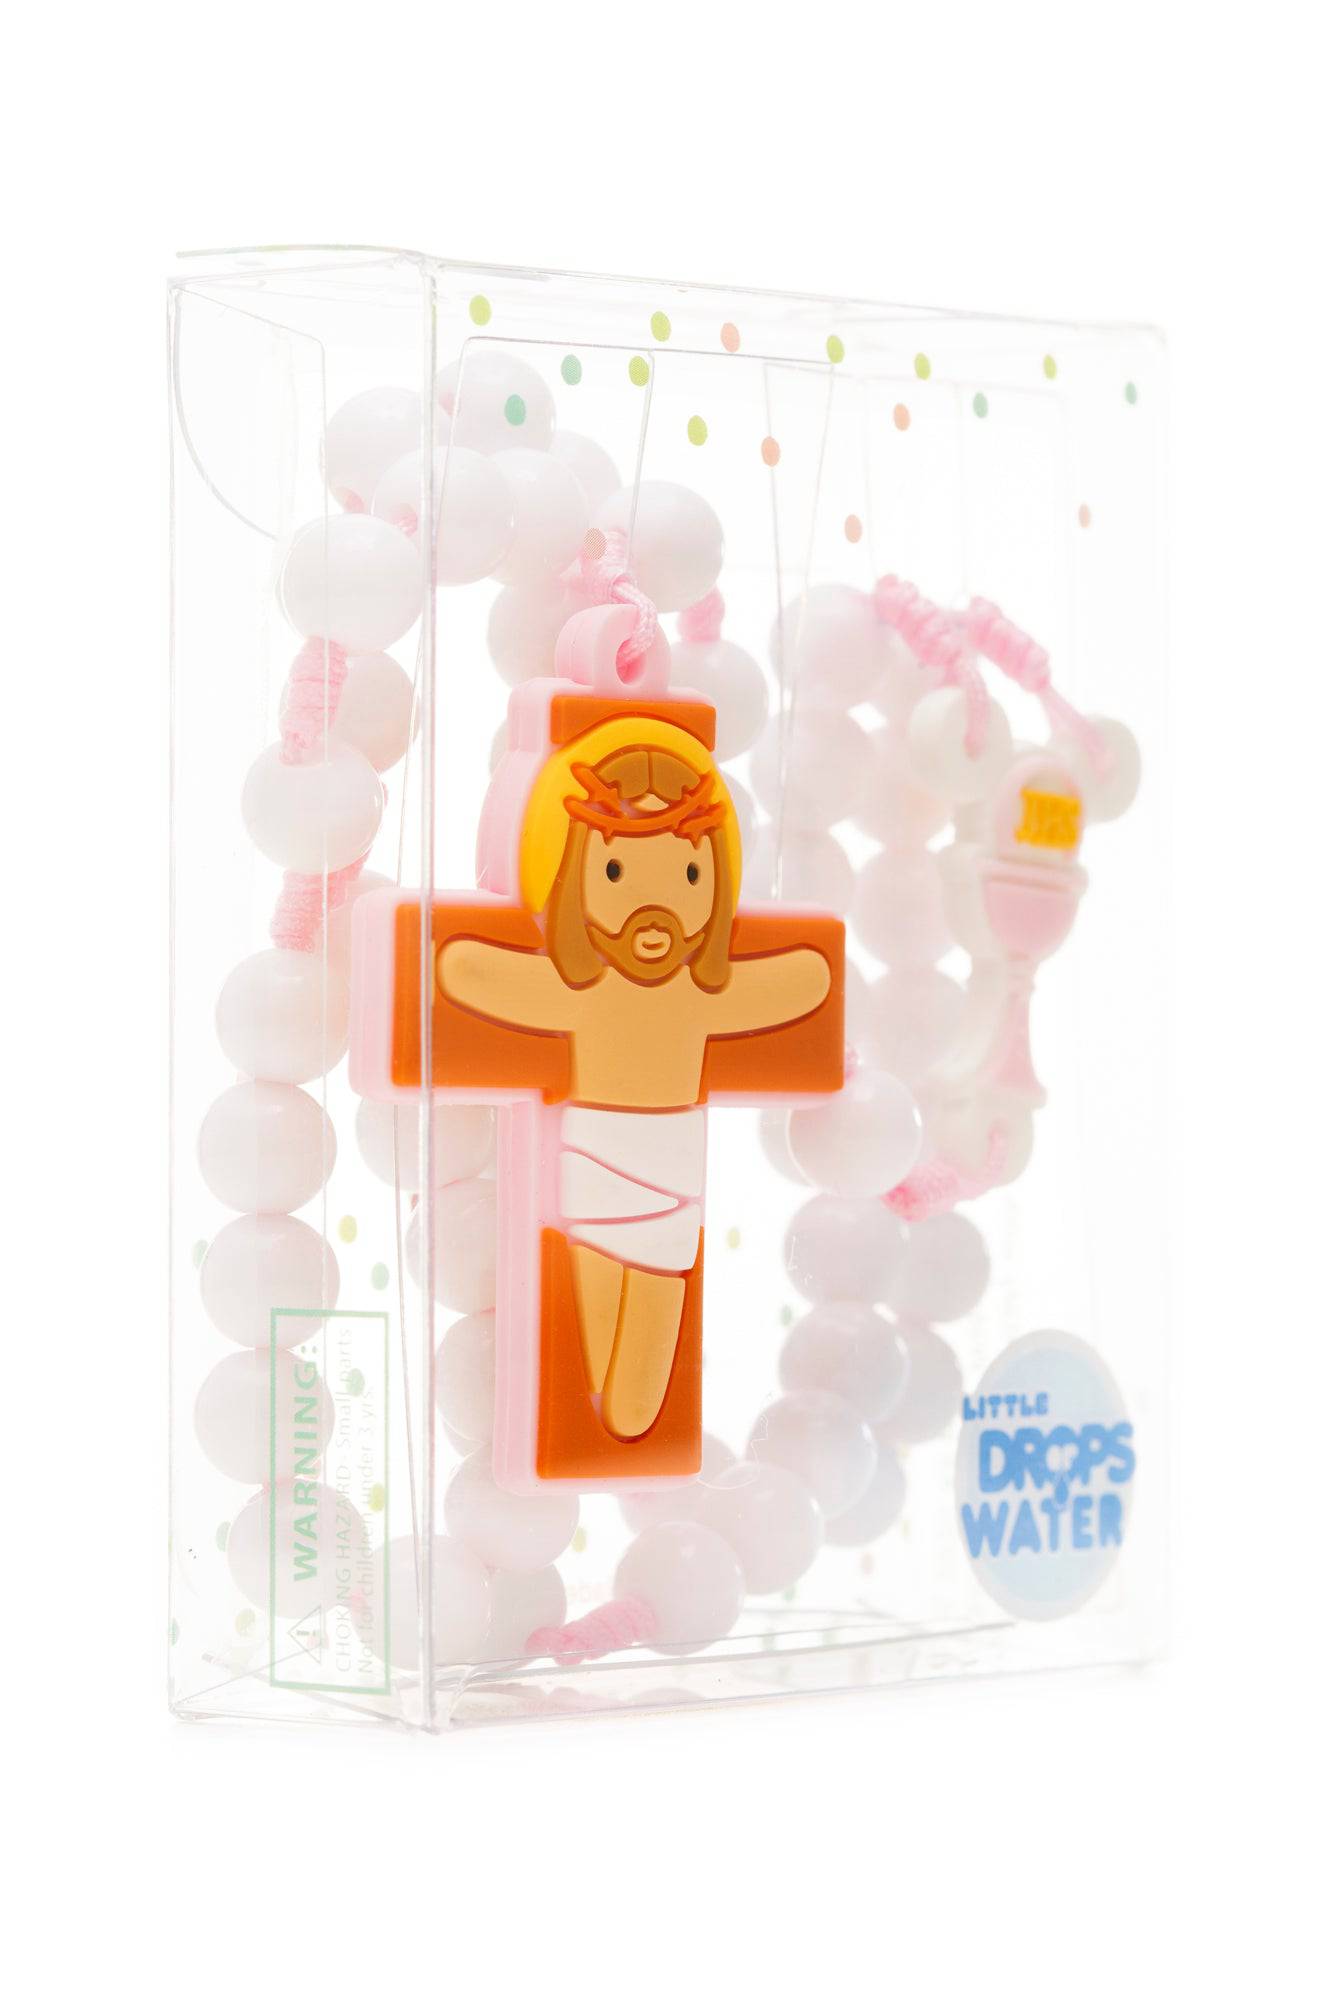 First Communion Pink Rosary - Little Drops of Water